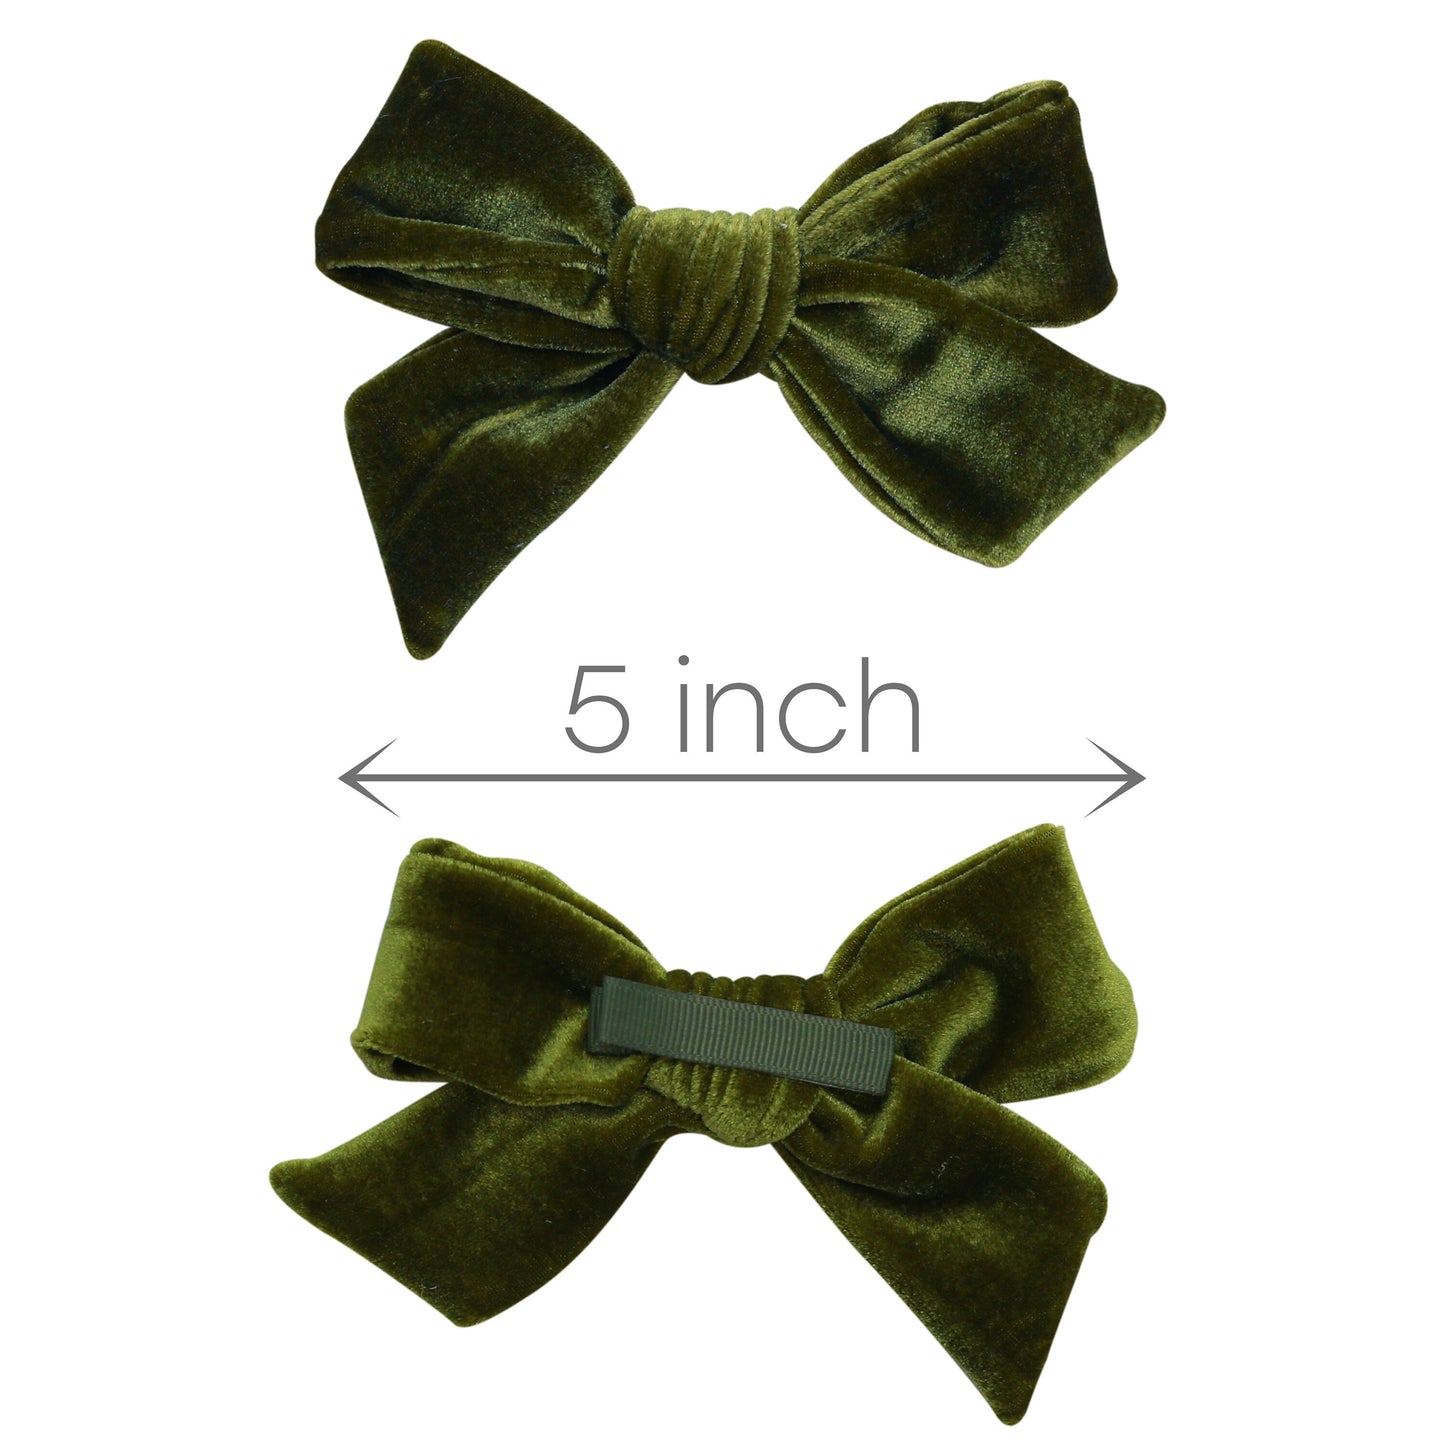 Velvet hair bow clips bows for toddlers girls, hair clip, Velvet bows hair clips for girls, toddlers barrettes, bow alligator clip Large 5"